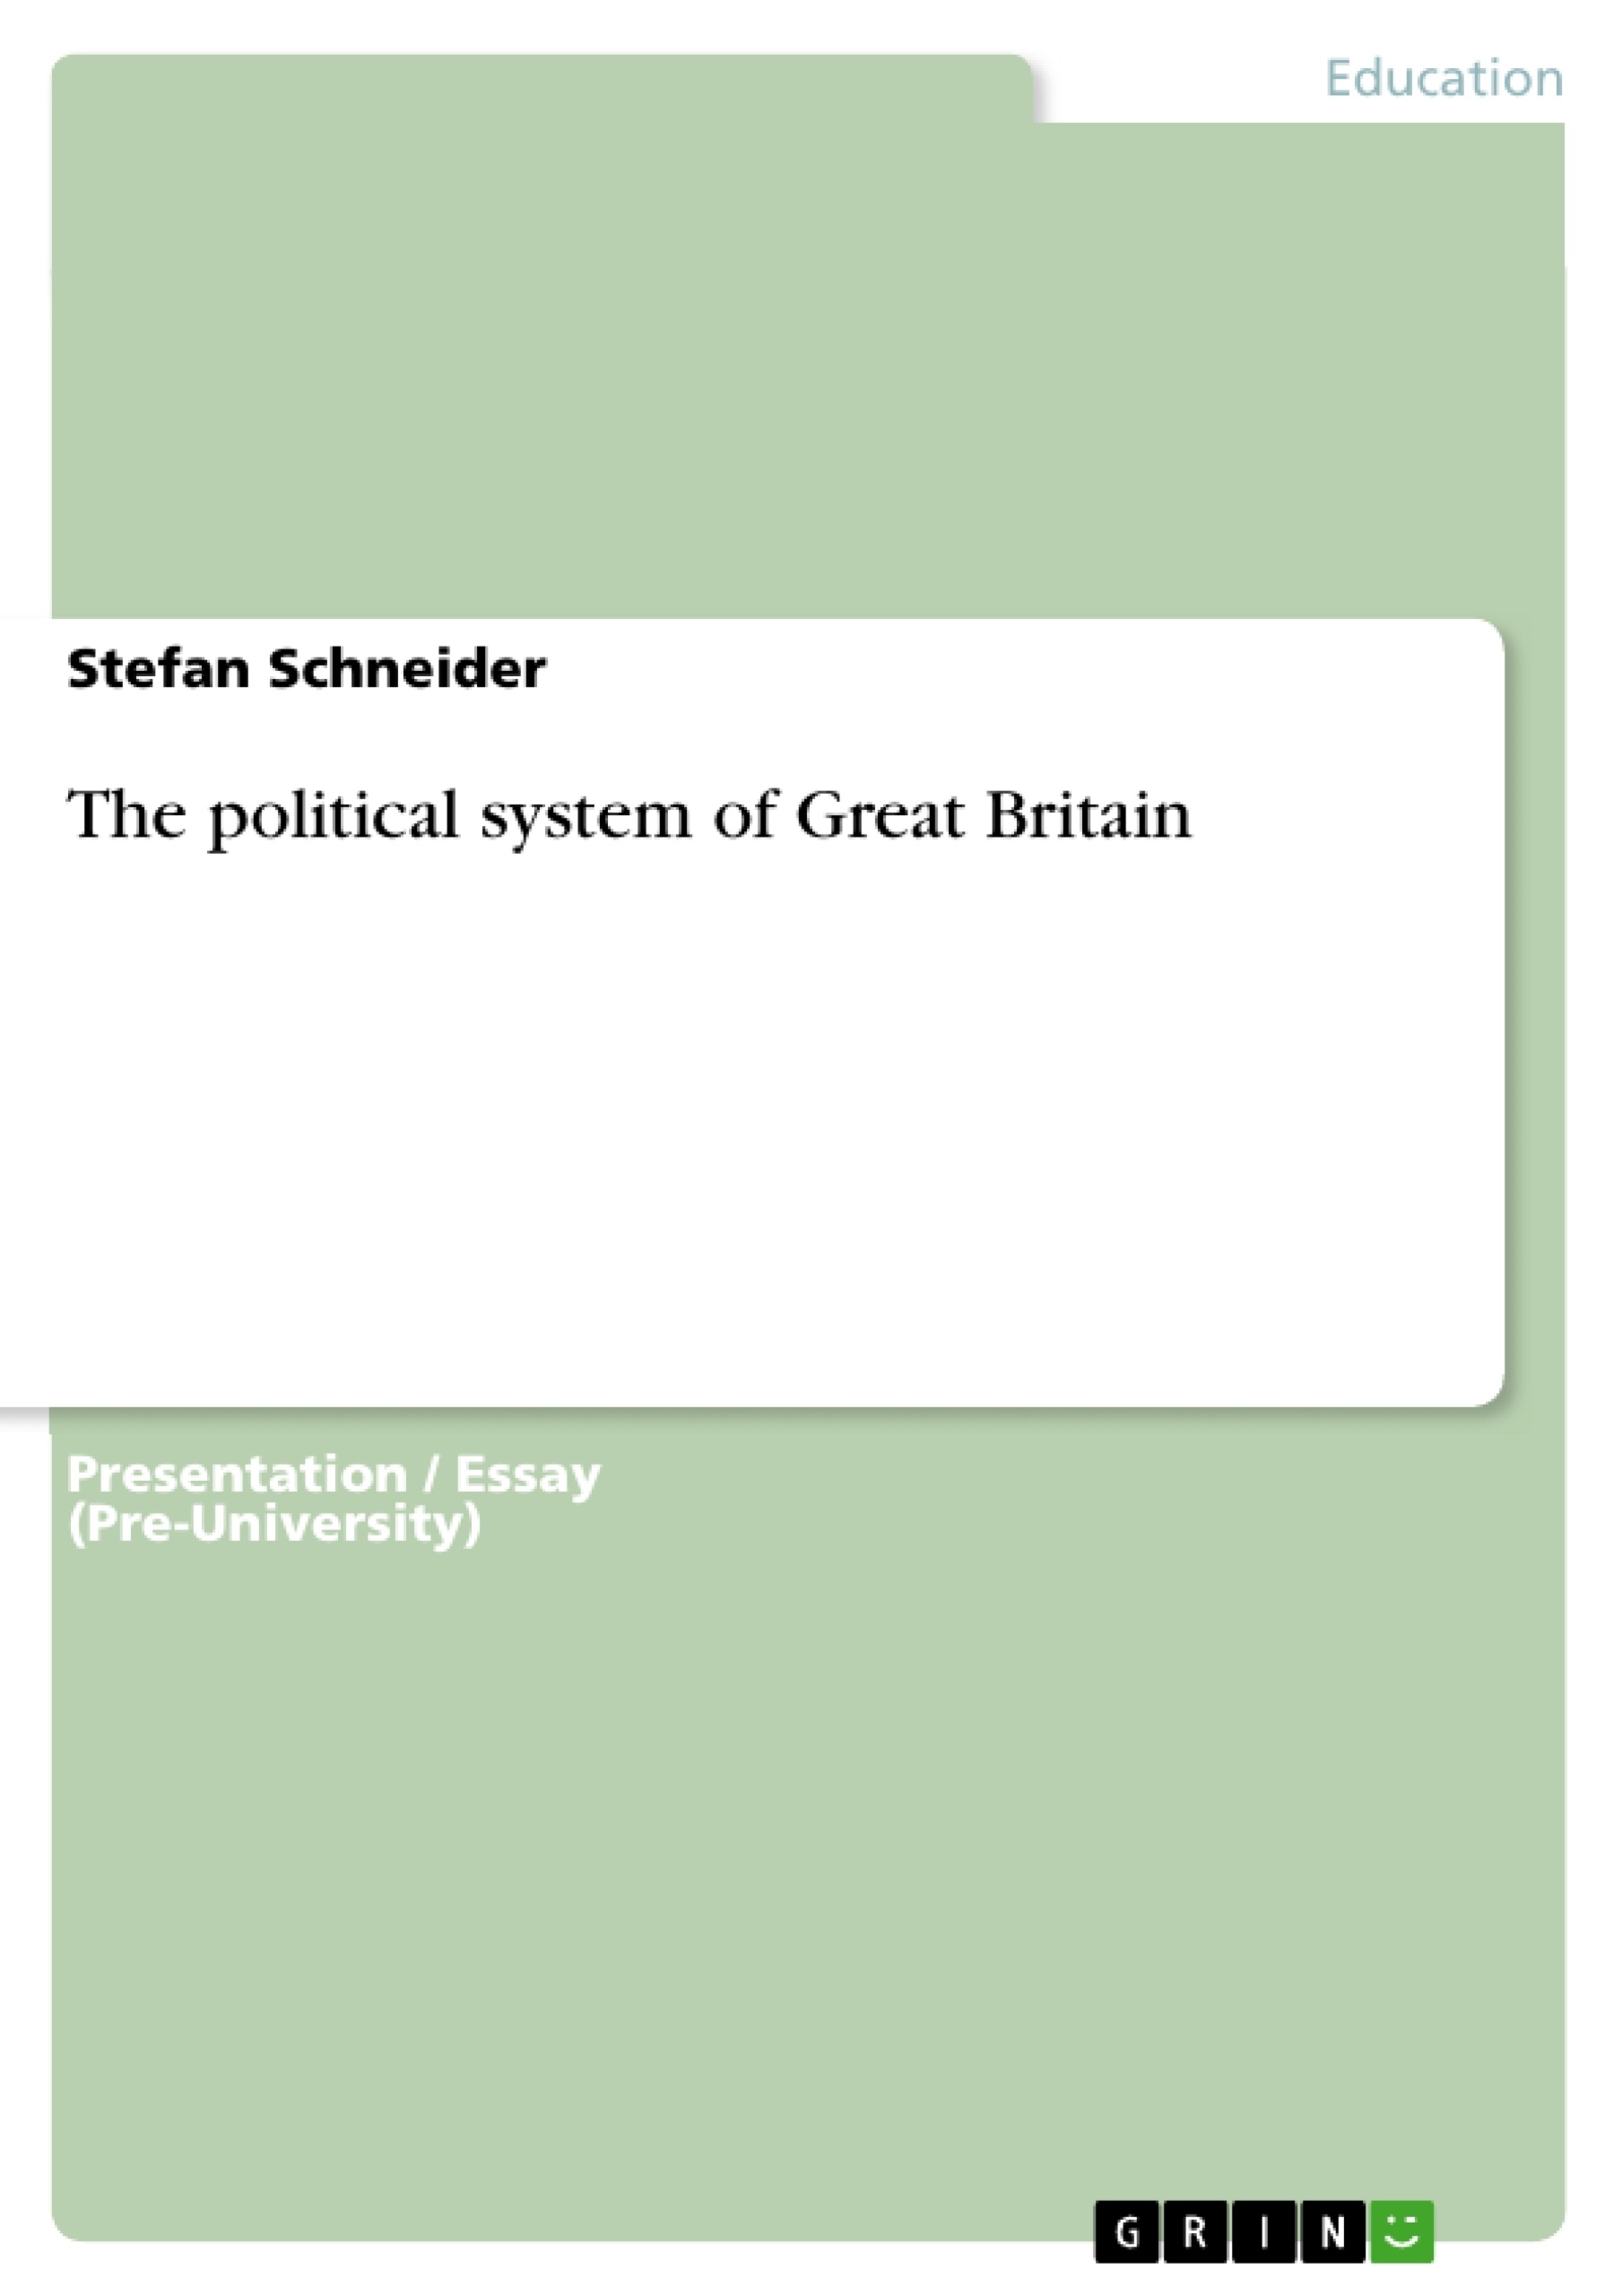 Title: The political system of Great Britain